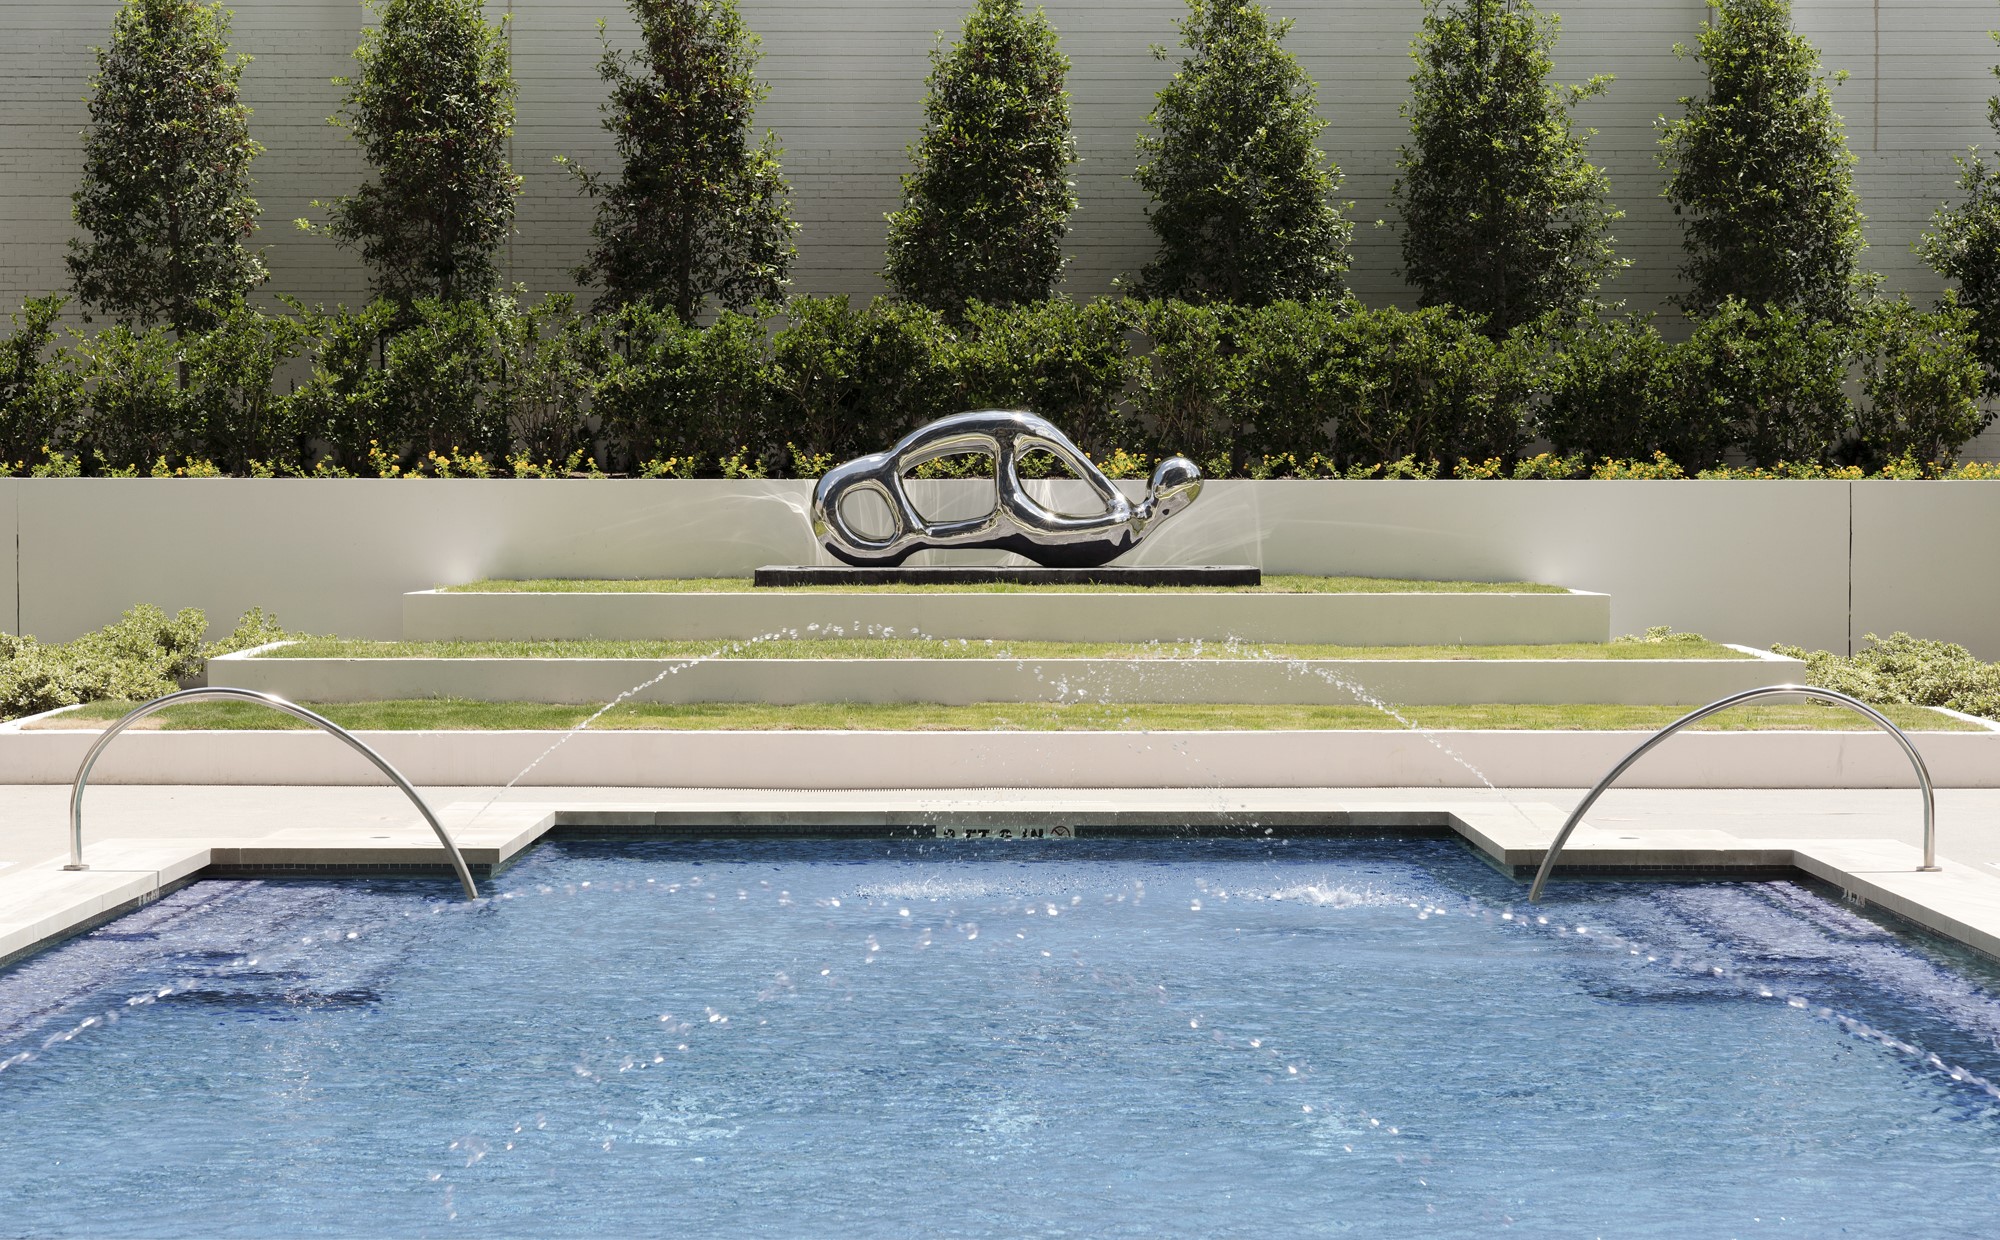 Tiered landscaping and a stunning sculpture are the backdrop for the lap pool.